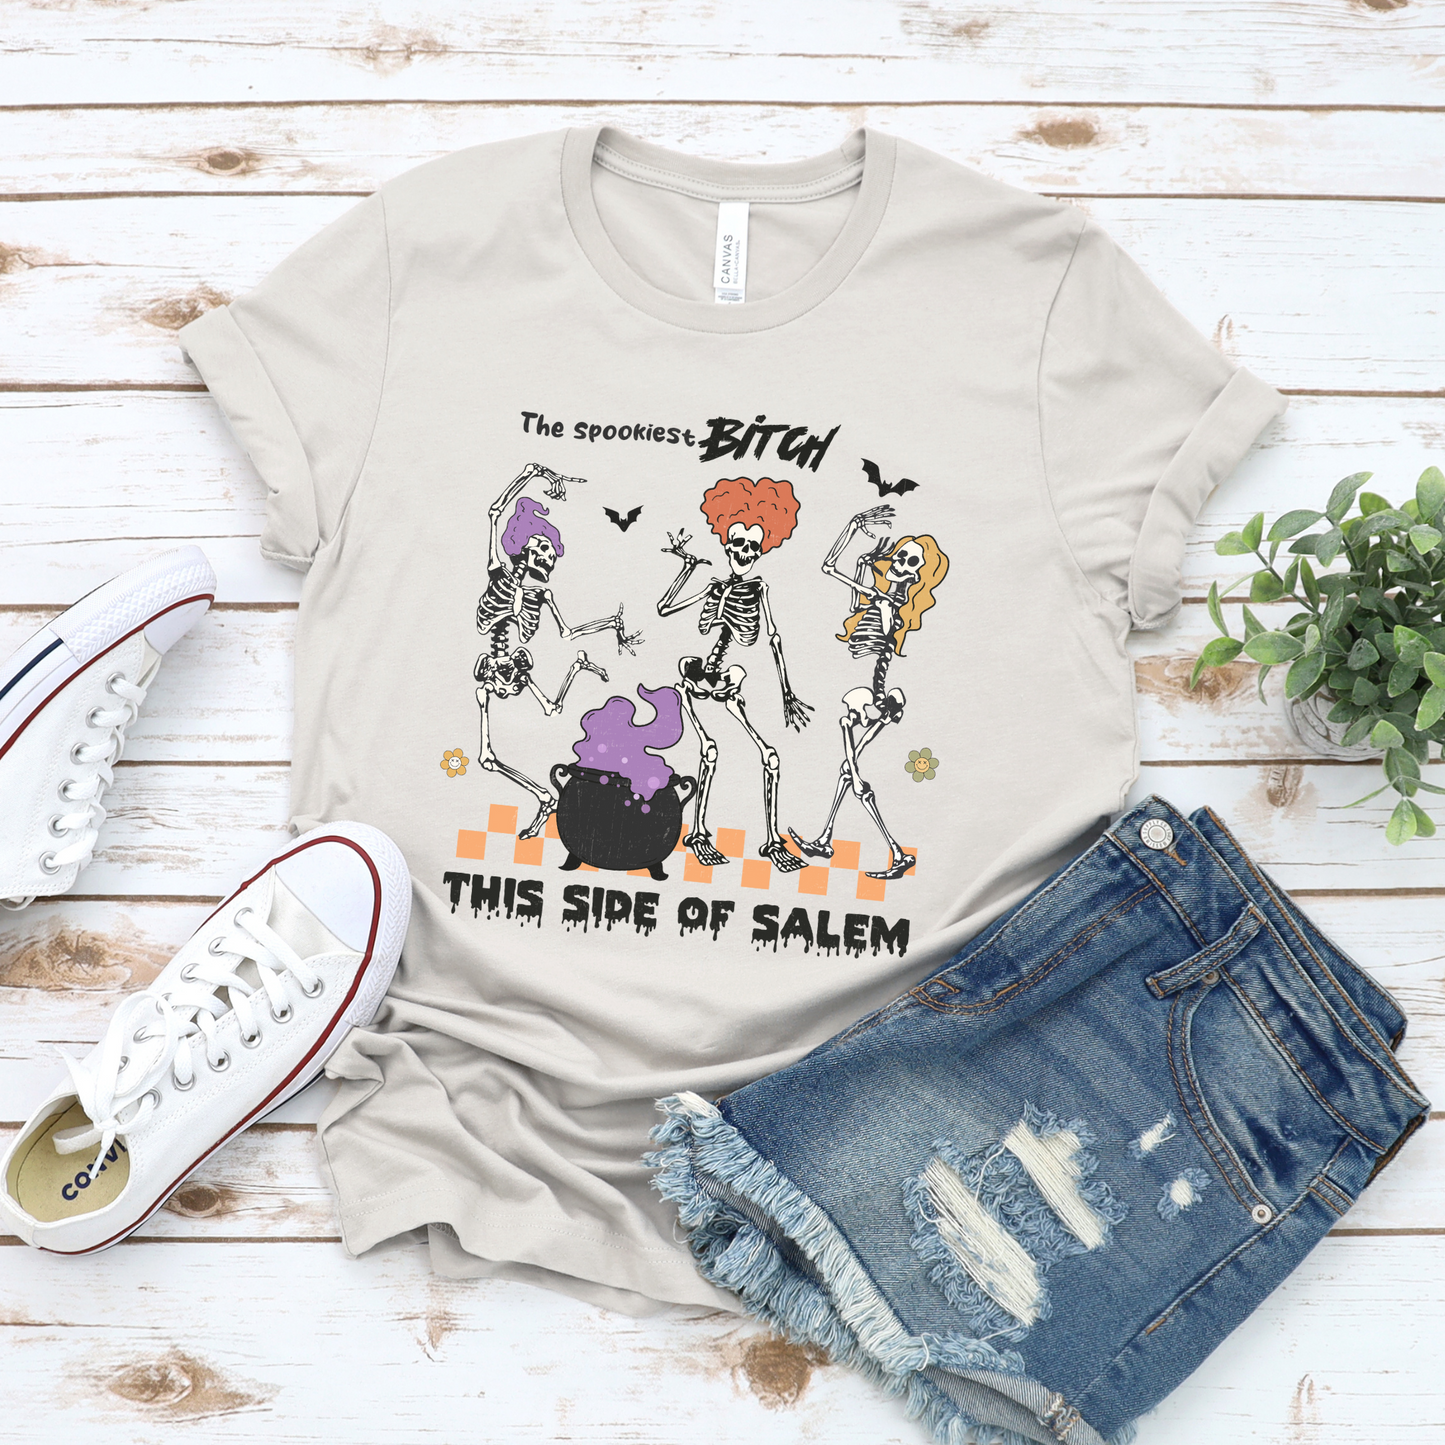 Spookiest Bitch of This Side of Salem T-Shirt